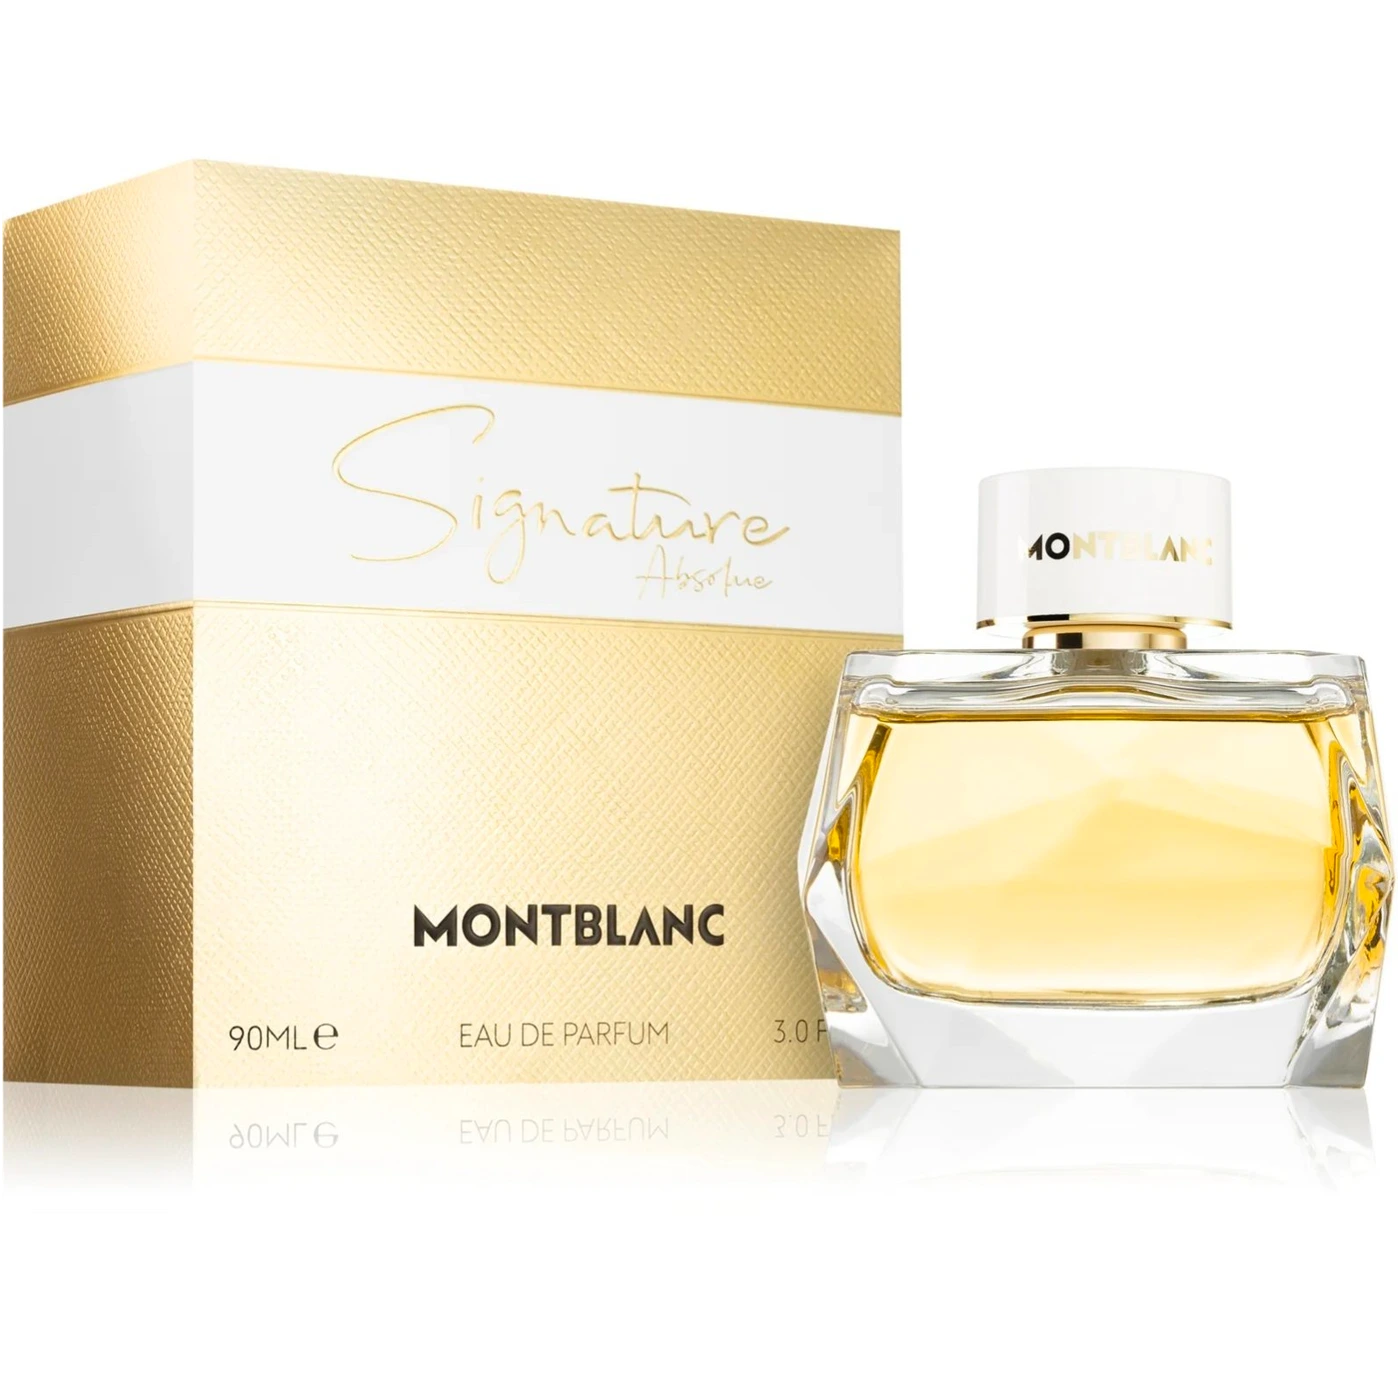 <p data-mce-fragment="1">Influenced by Montblanc's iconic gold nib, Signature Absolue is a sophisticated EDP for women that combines a bright freshness of Pear, Mandarin Orange, and Pink Pepper with a floral bouquet of Ylang-Ylang, Frangipani, and Tuberose. Rounding off this distinctive scent, the base is further emphasized with Tonka Bean and Cedar for a truly luxurious and enduring aroma.</p>